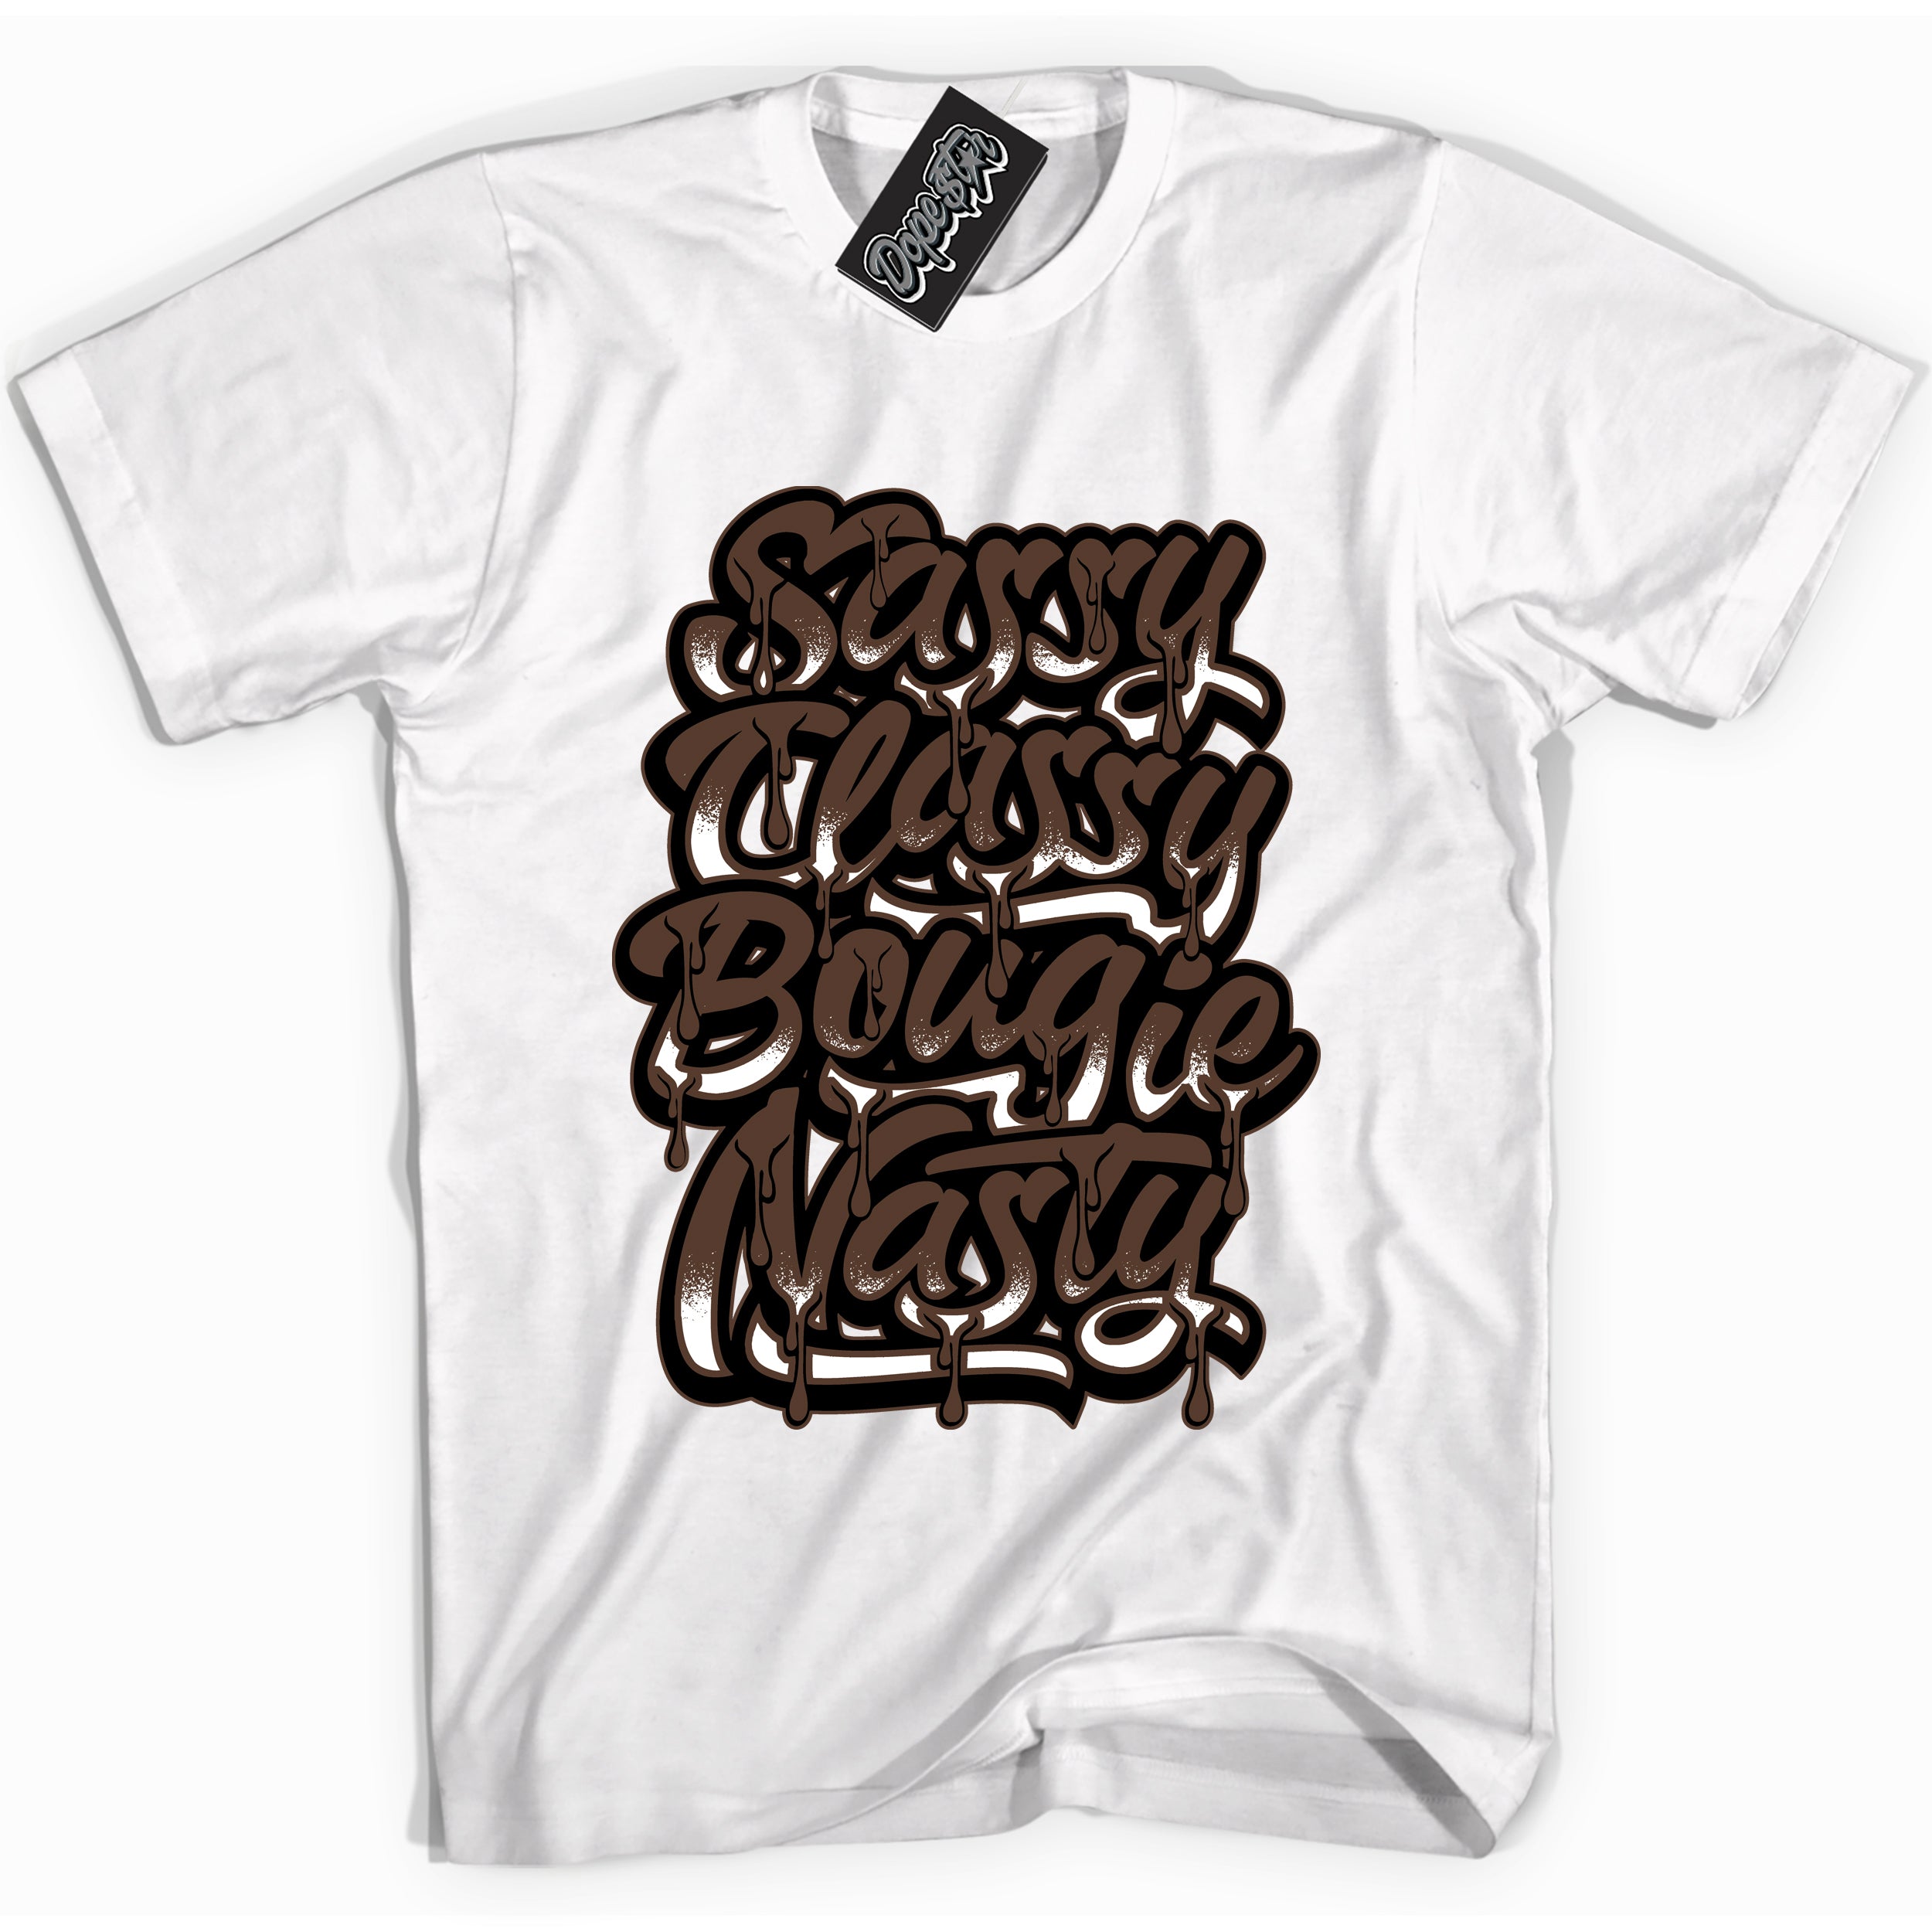 Cool White graphic tee with “ Sassy Classy ” design, that perfectly matches Palomino 1s sneakers 